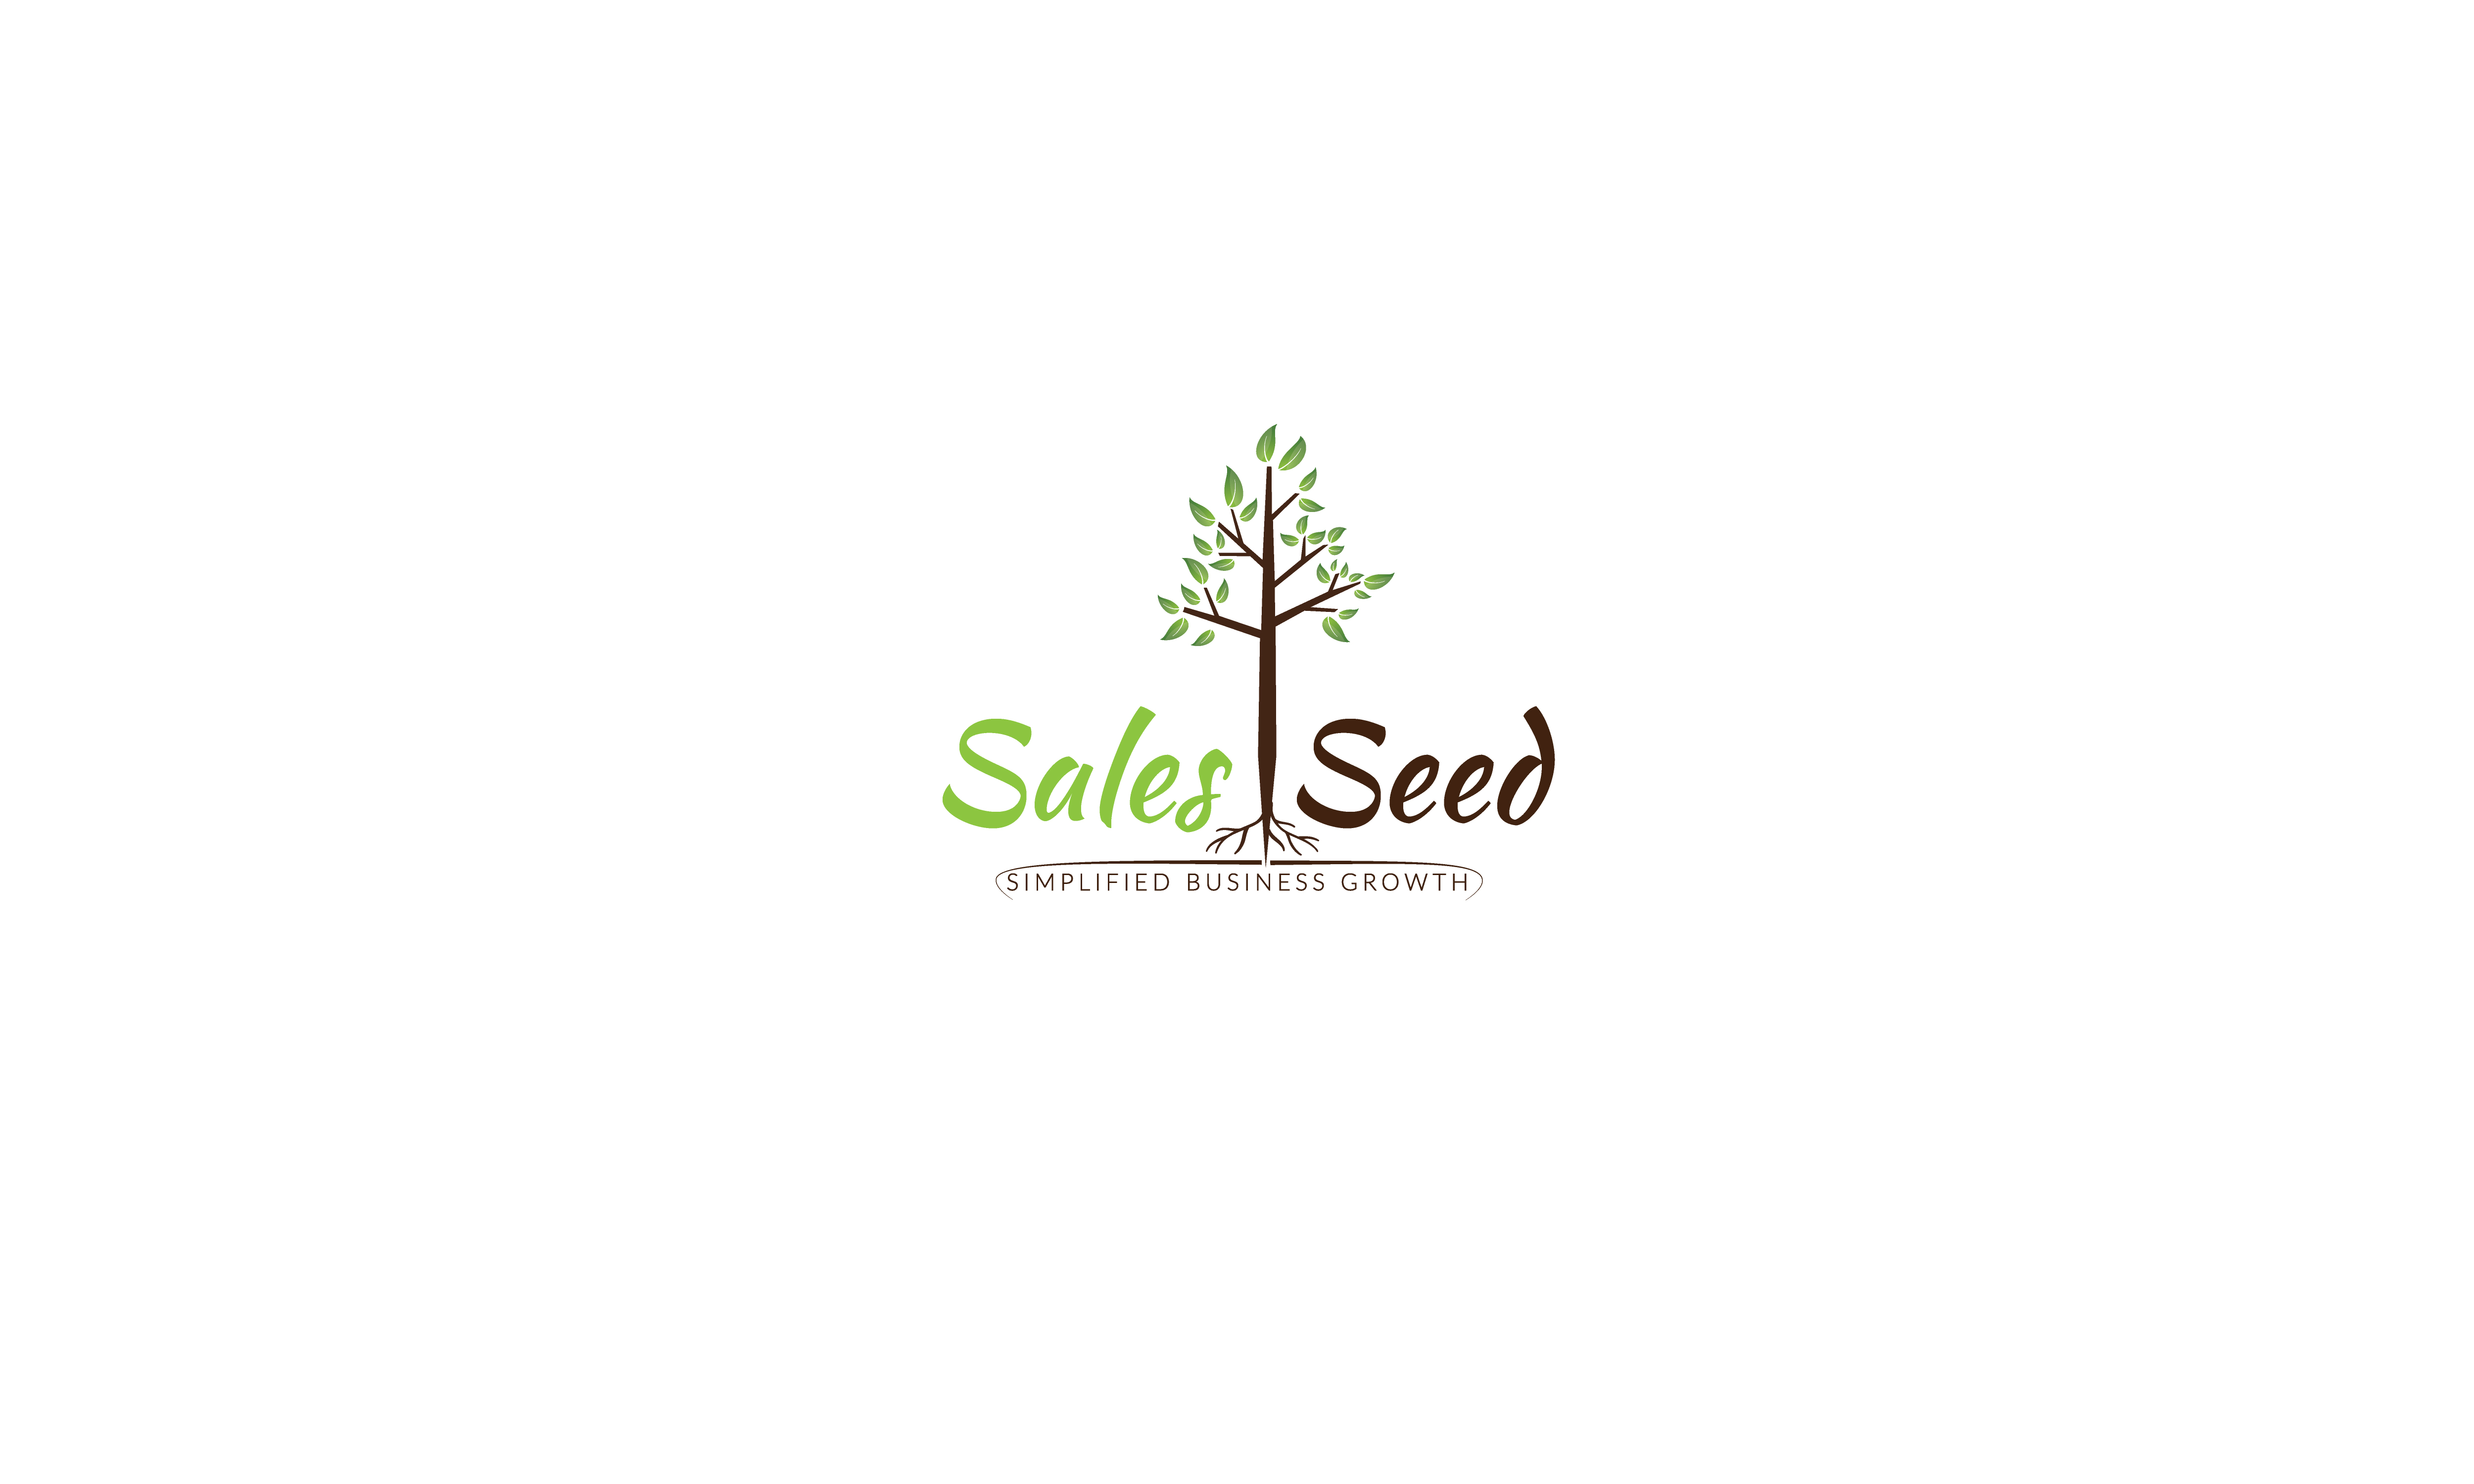 The Sales Seed